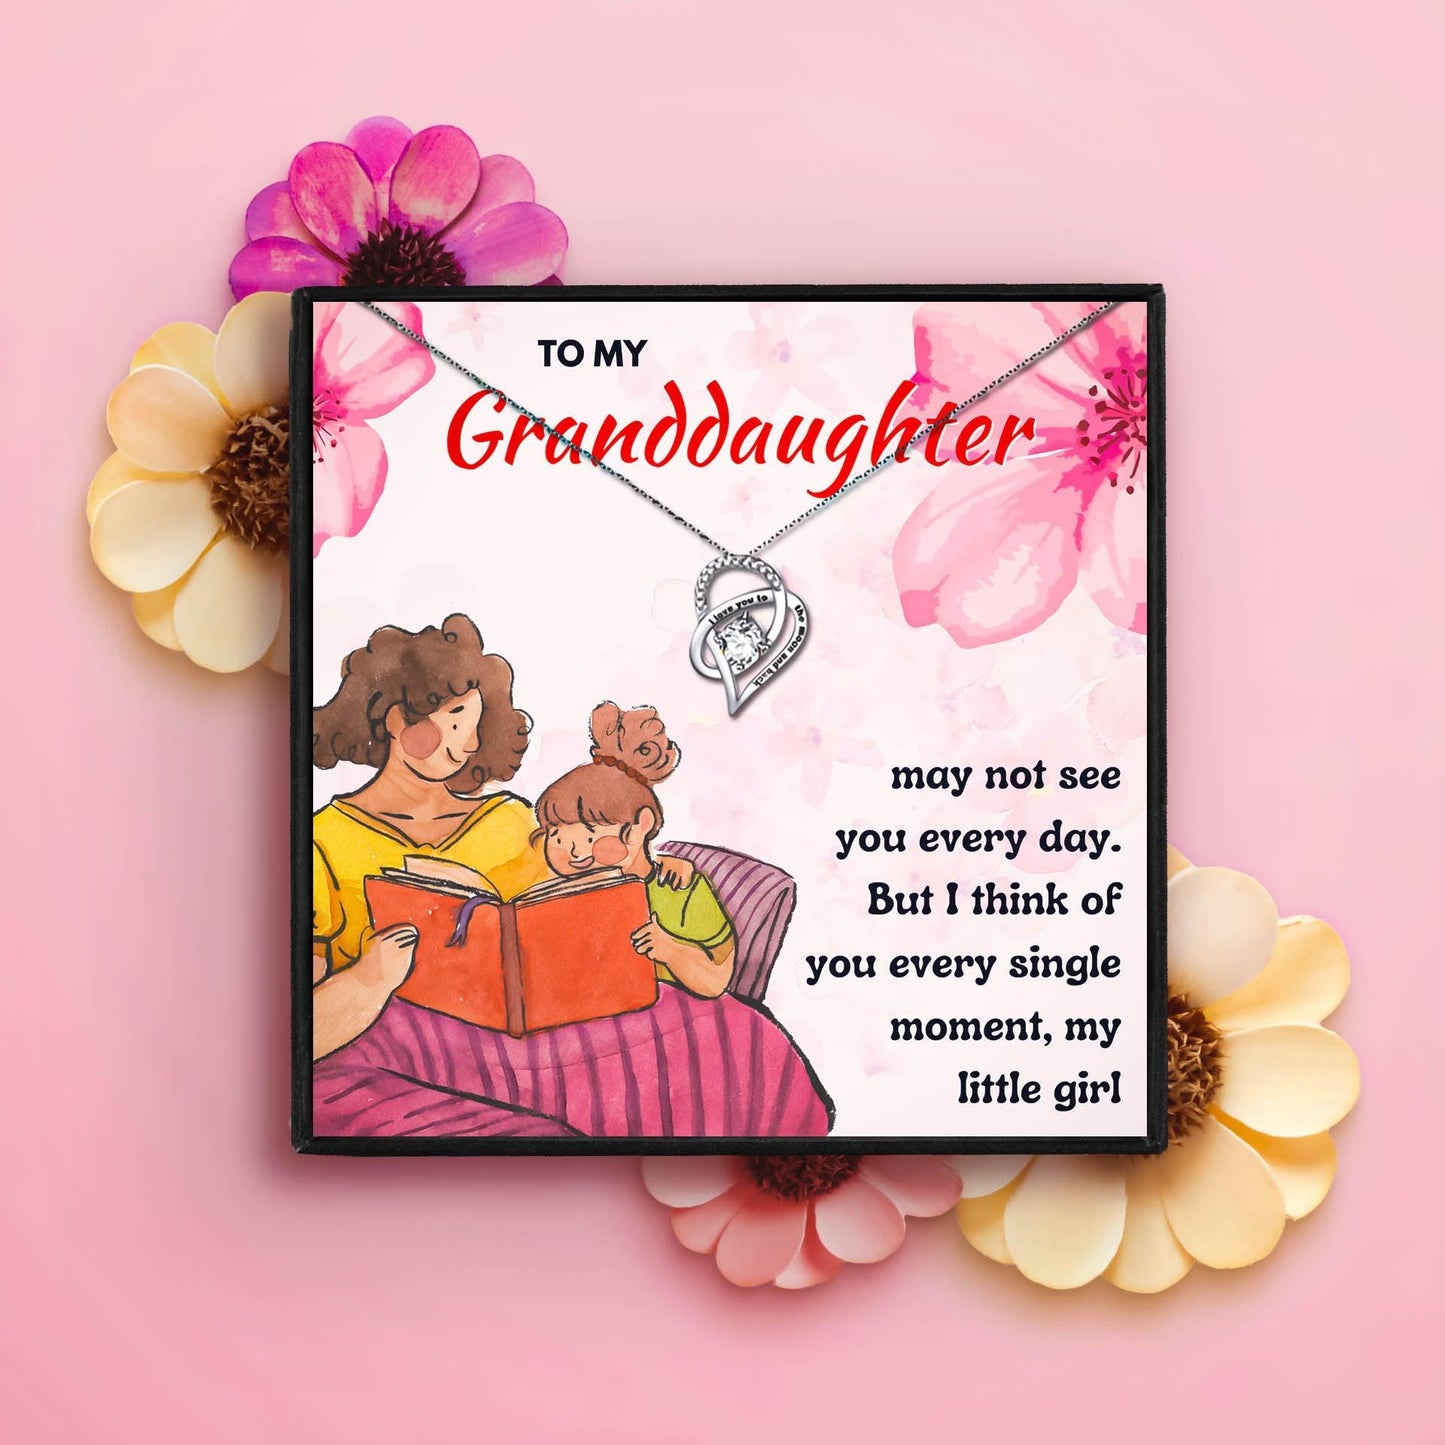 Special Gifts For Granddaughters From Grandma in 2023 | Special Gifts For Granddaughters From Grandma - undefined | gifts for teenage granddaughter, graduation gifts for granddaughter, granddaughter necklace from grandma, special gifts for granddaughters, unique granddaughter gifts | From Hunny Life | hunnylife.com